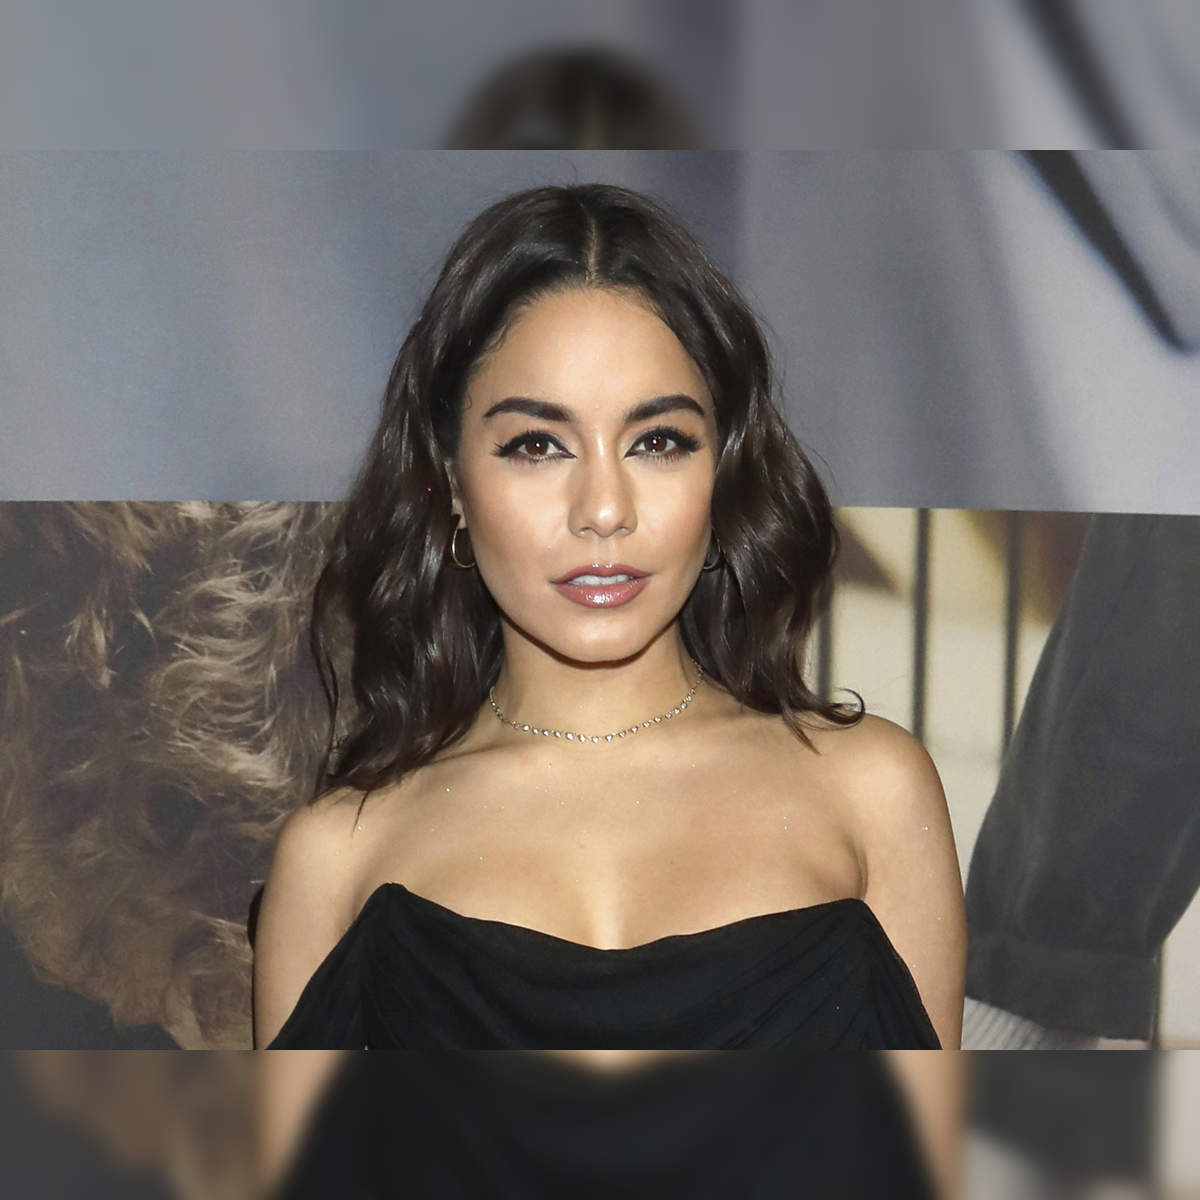 Why Instagram Is the No. 1 Social App for Young Stars Like Vanessa